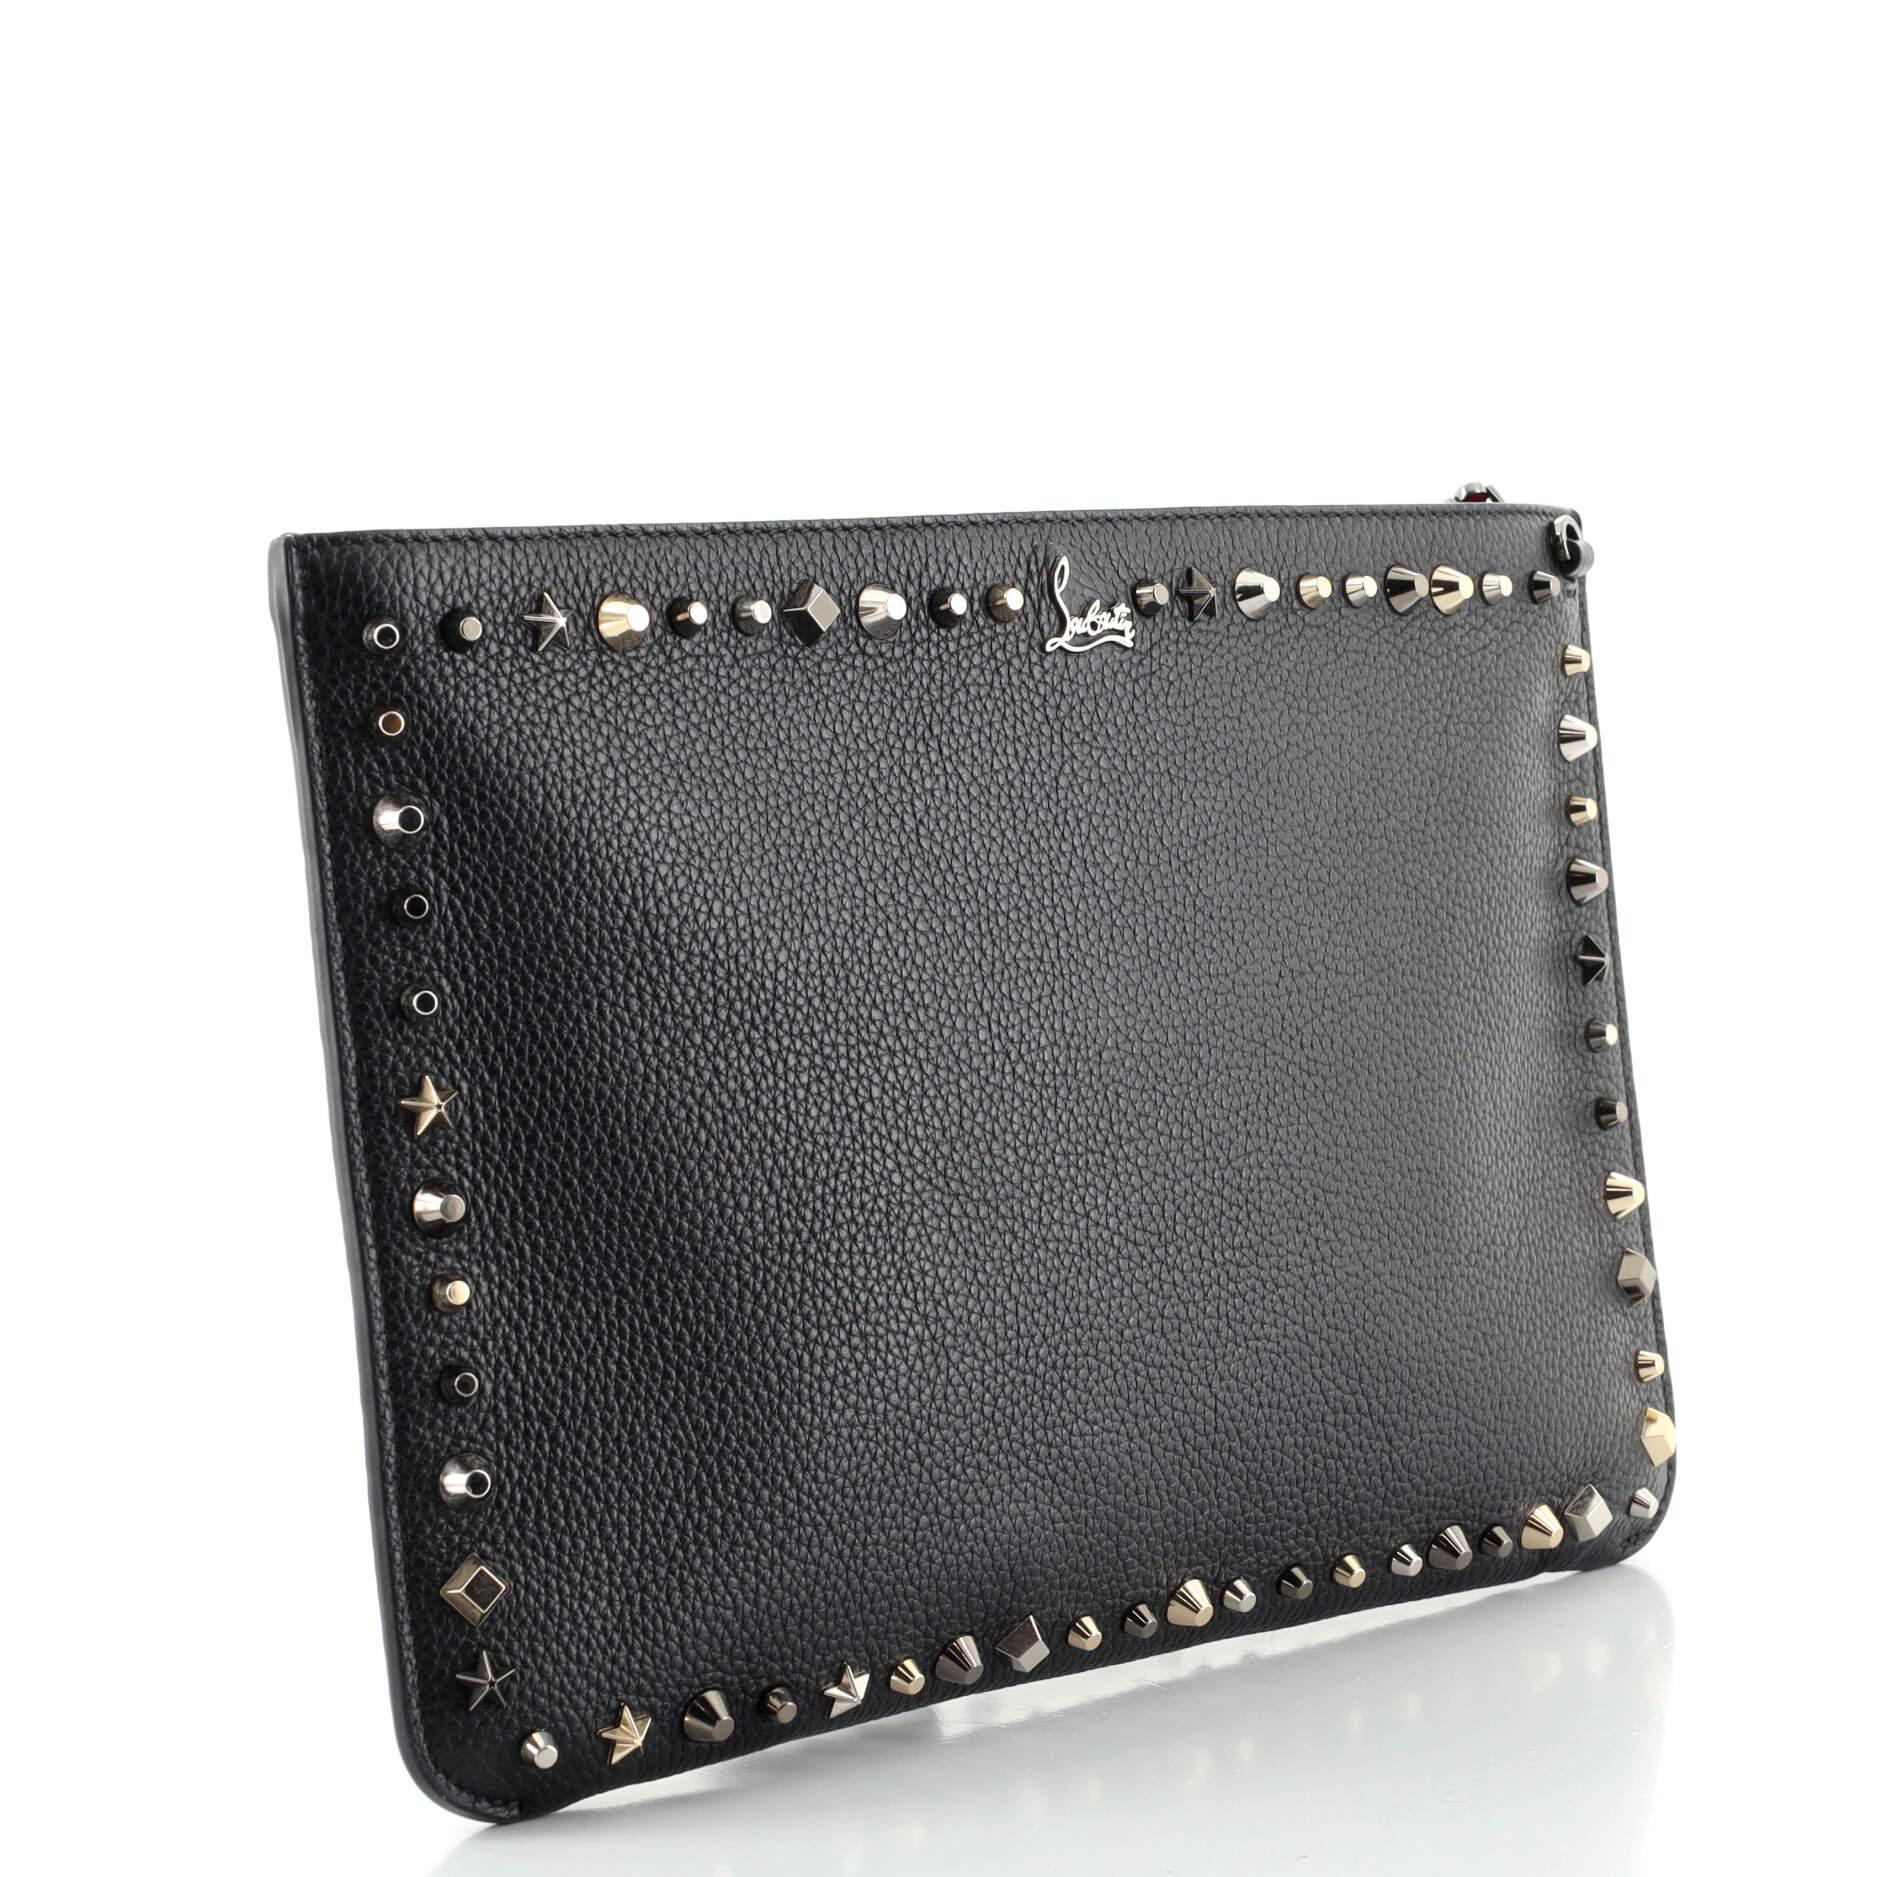 loubiposh spiked leather clutch